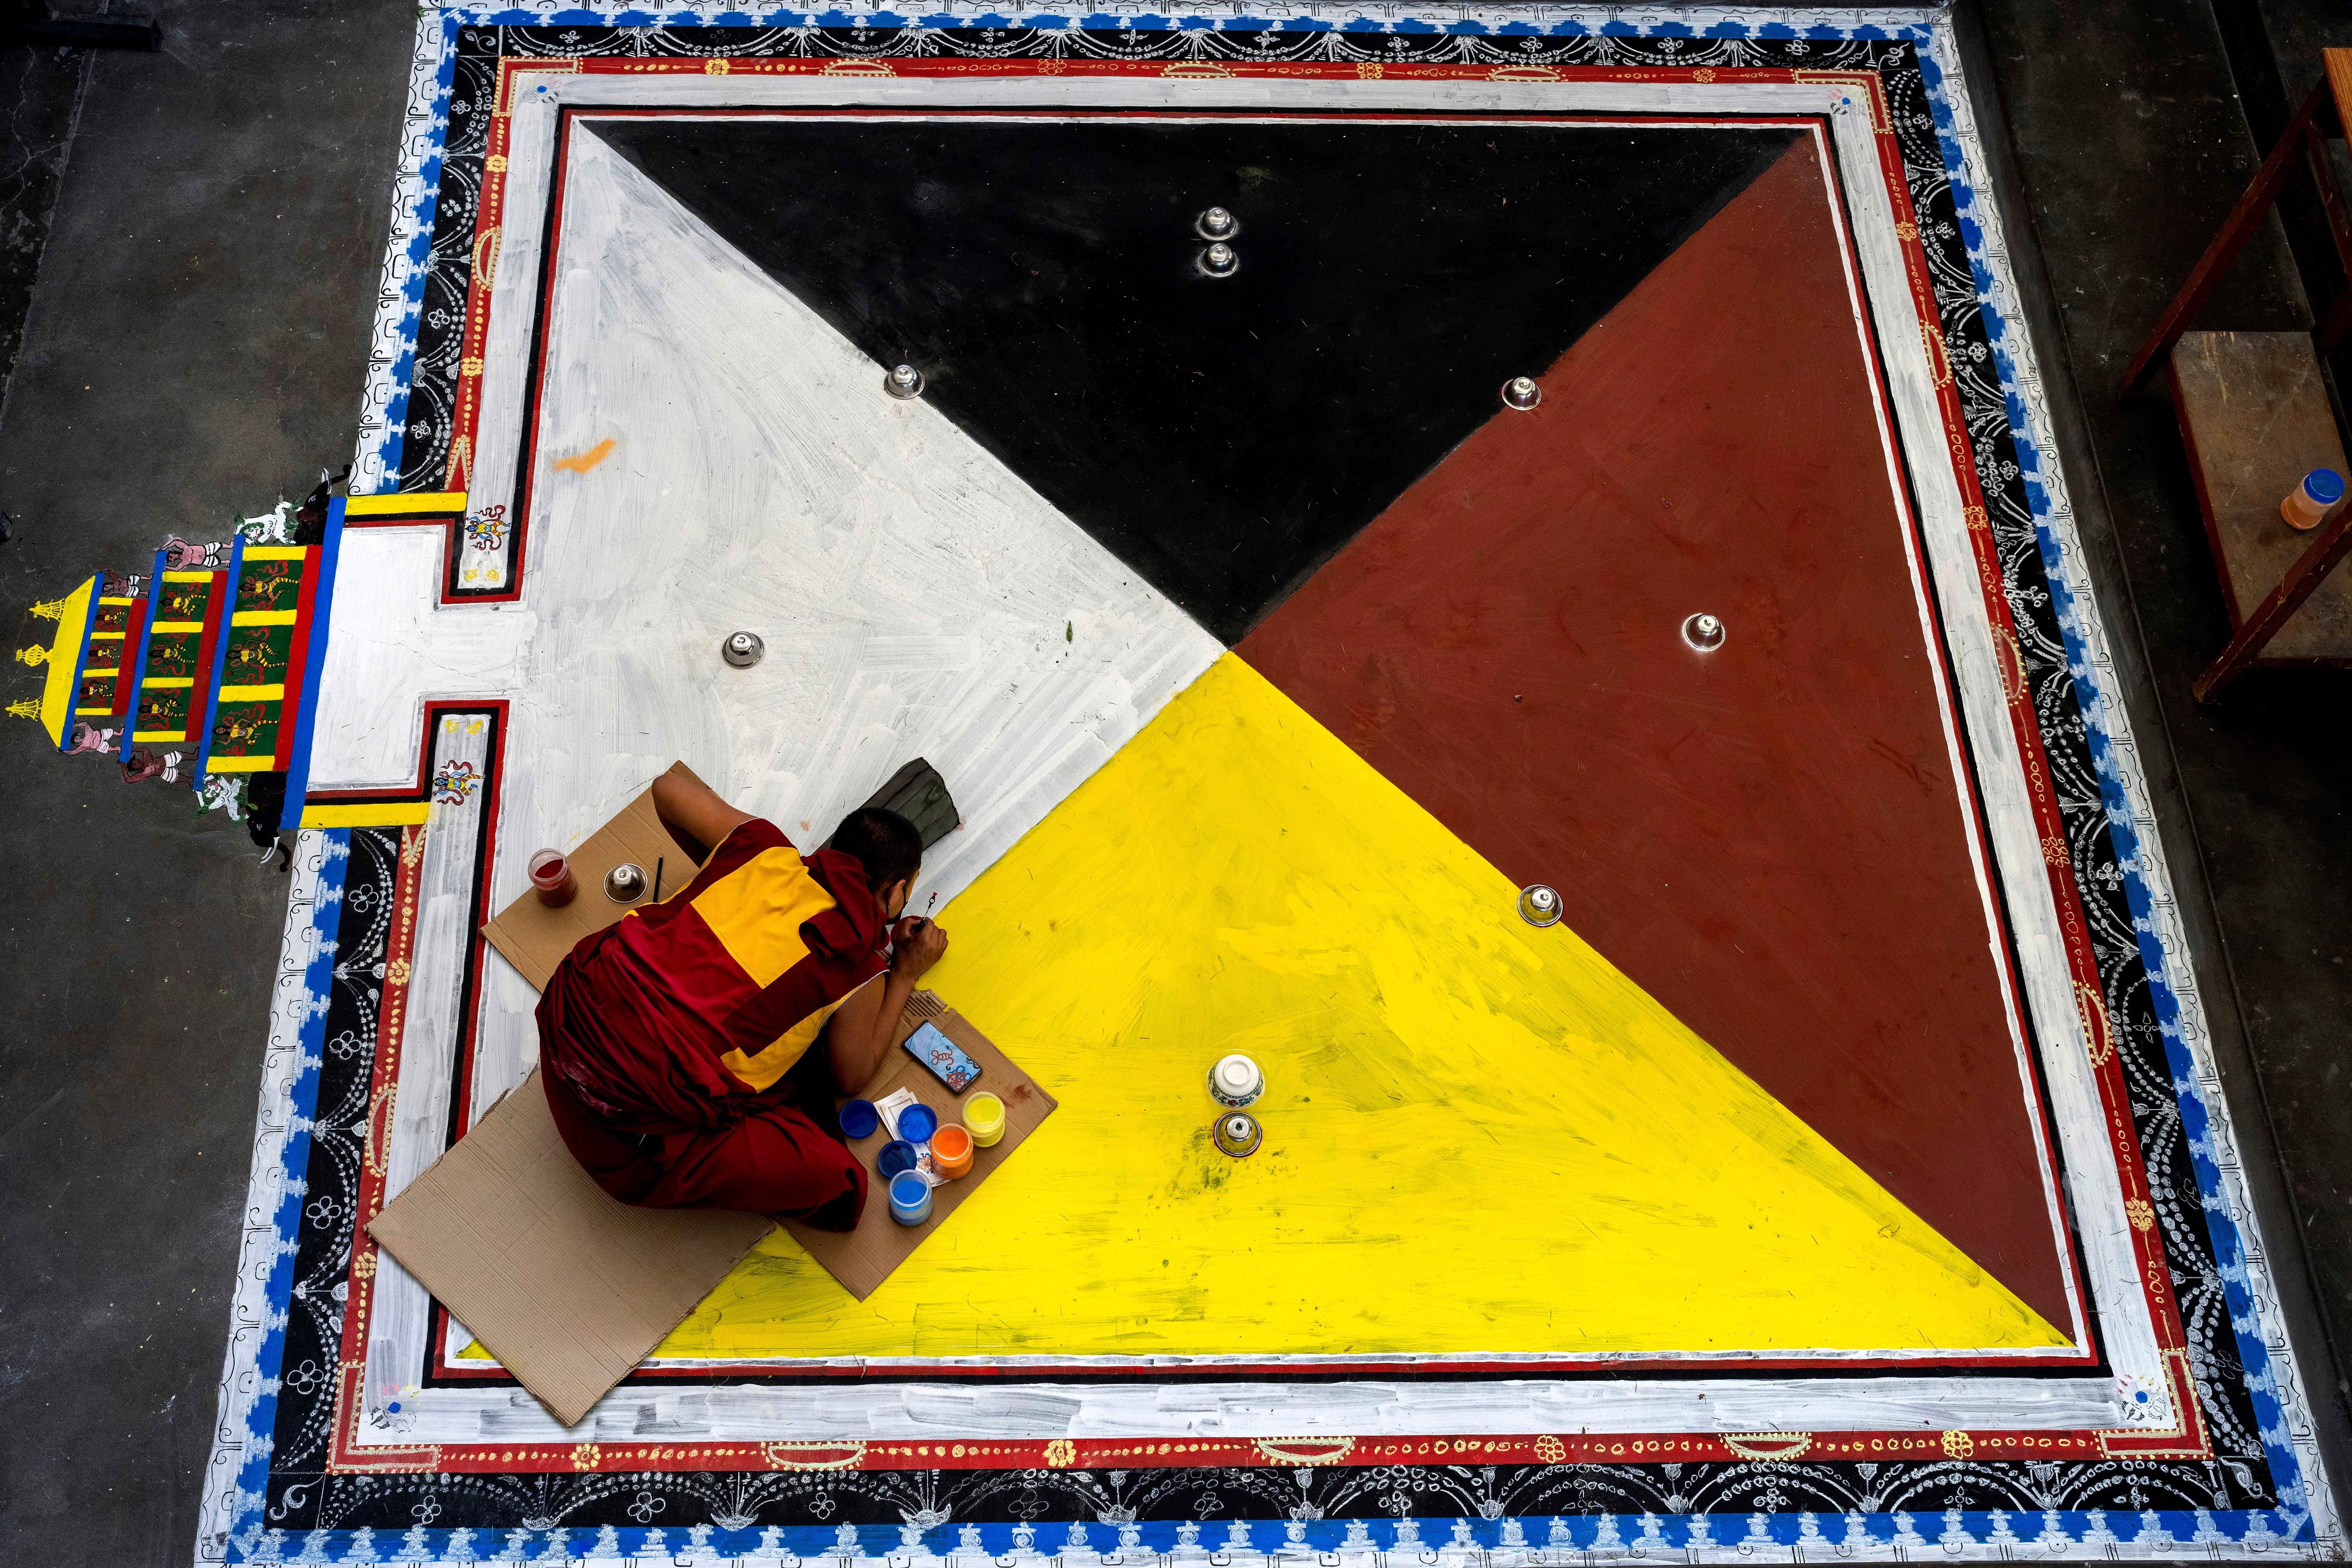 <p>File photo: An exile Tibetan Buddhist monk creates a traditional motif on the floor in preparation for ritual prayers in Dharmsala, India on 20 May</p>